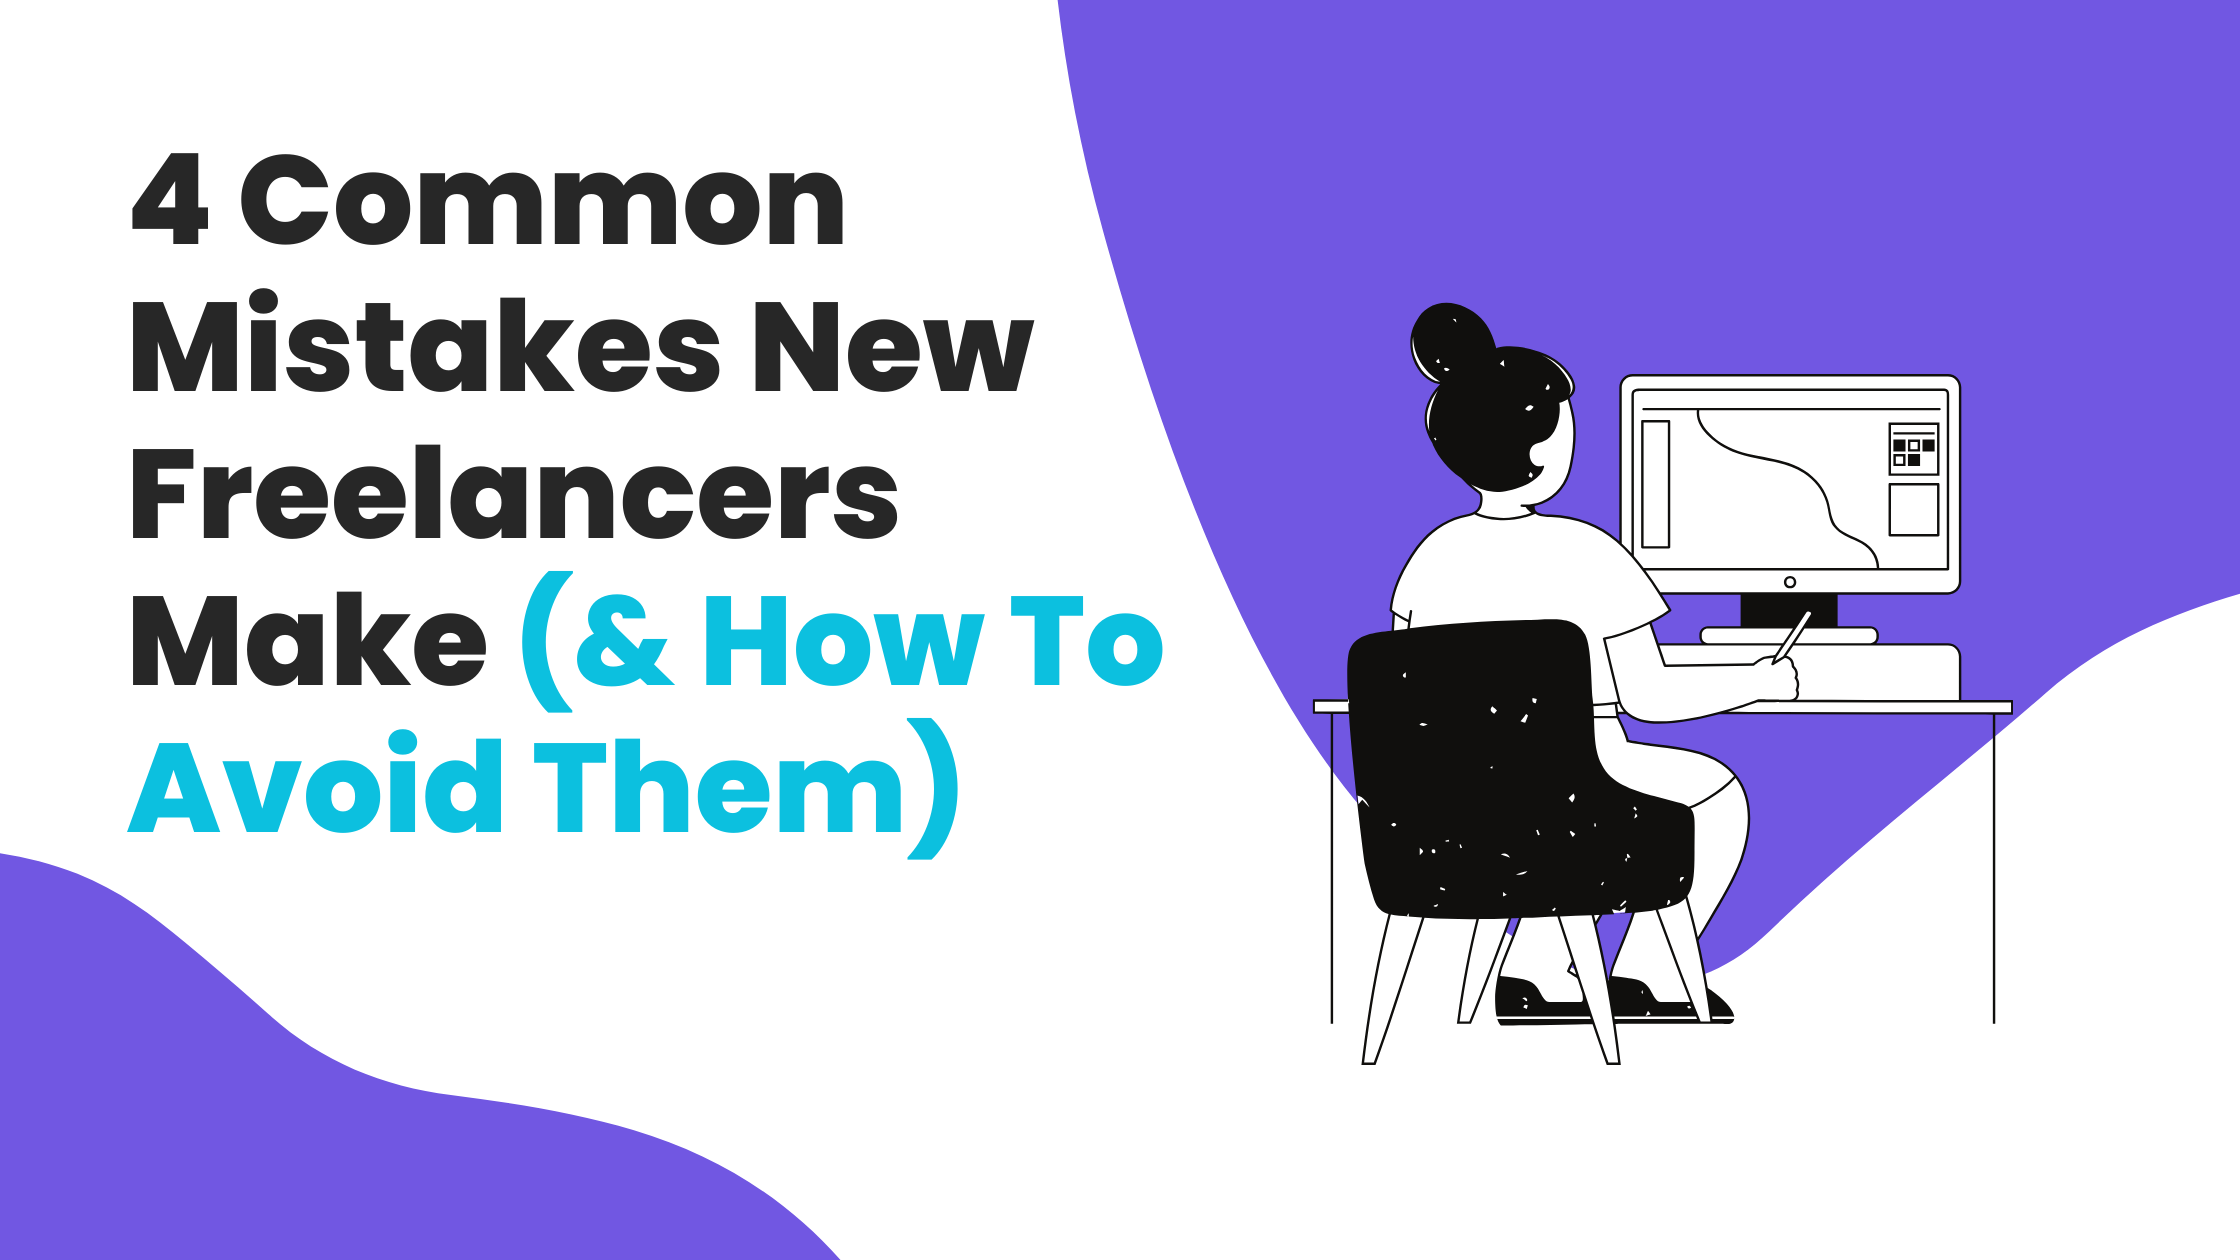 4 Common Mistakes New Freelancers Make (& How To Avoid Them)